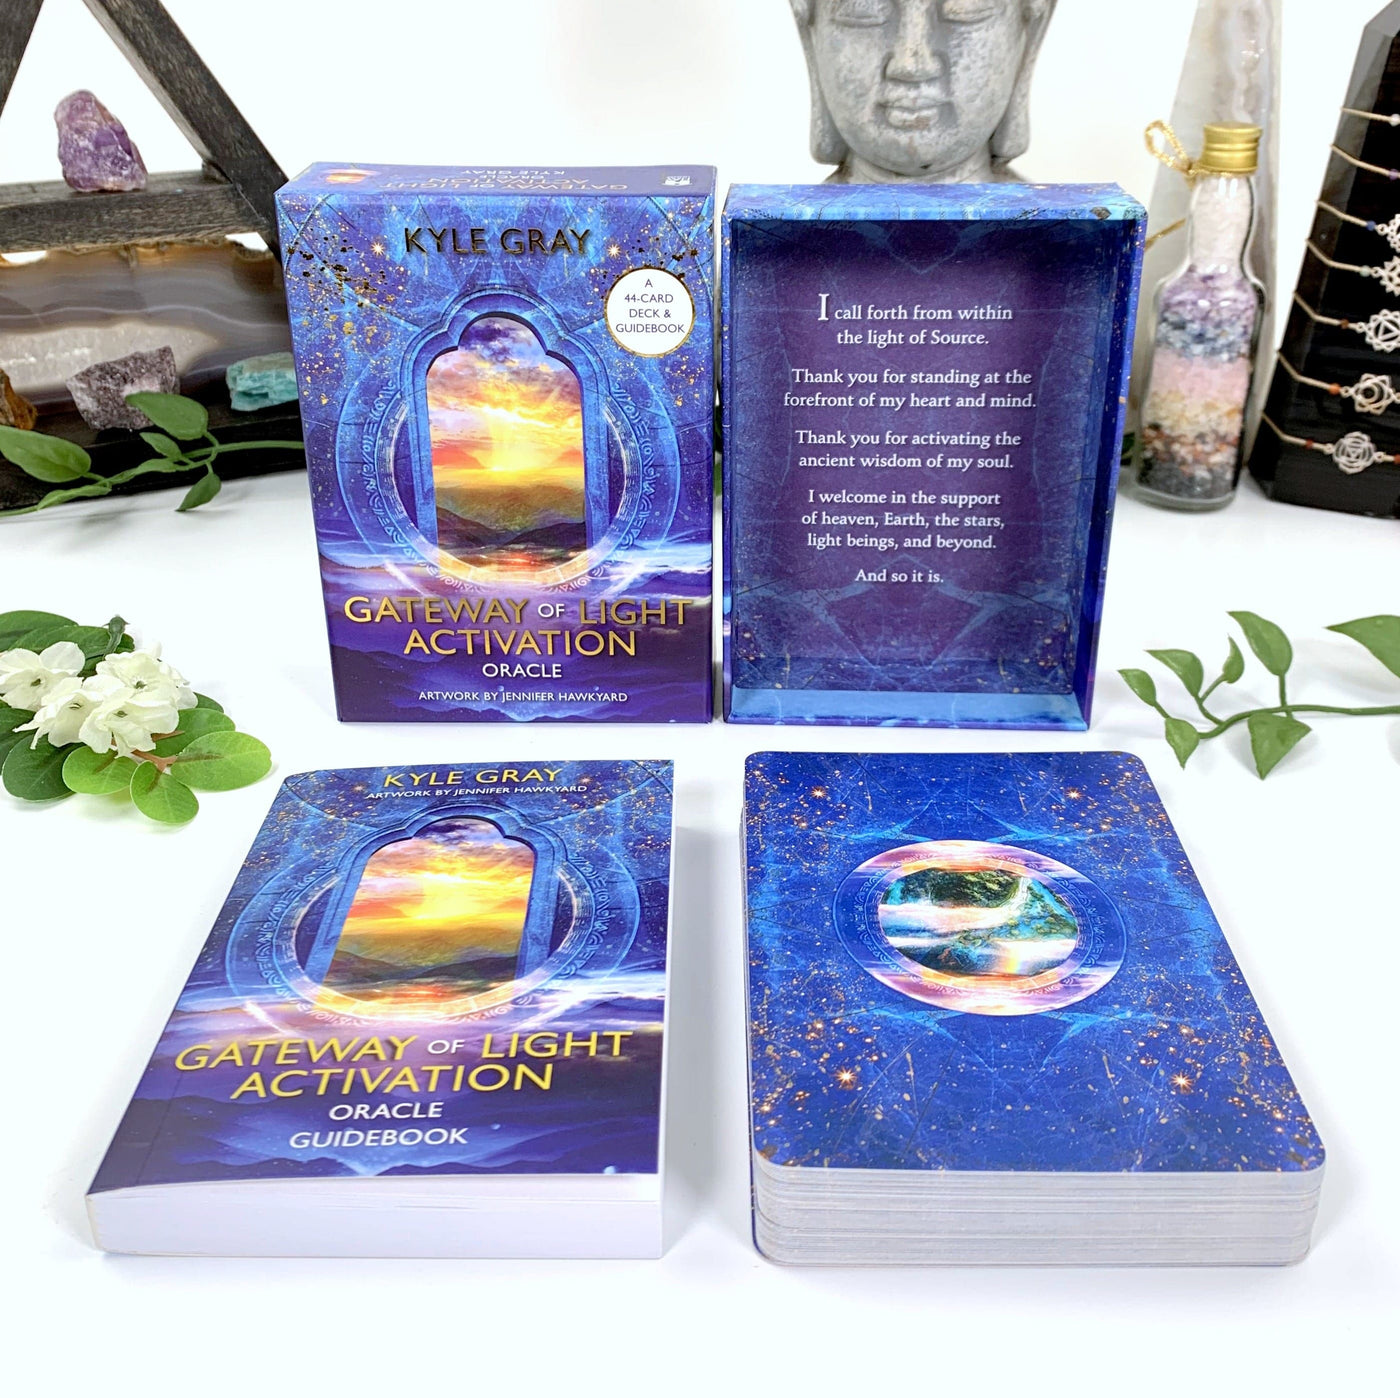 Image of contents of the box on a white background with a budha and some crystal props behind it.  Image shows box comes with a guidebook. Cards are blue with stars on them and a circle showing an outdoor sunset